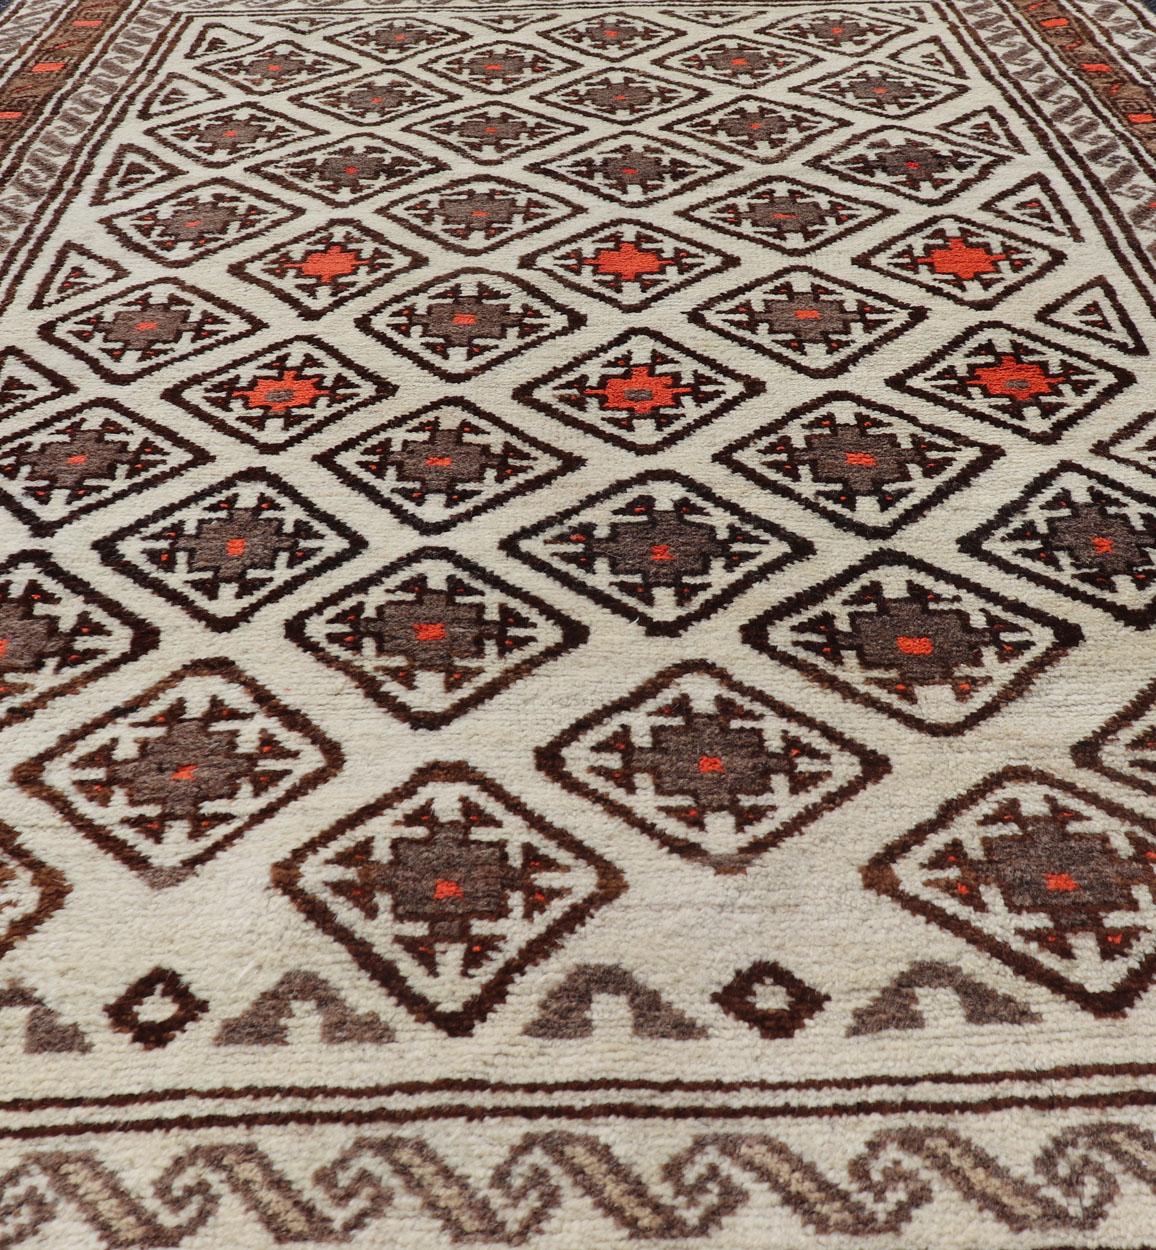 Antique Hand-Knotted Baluch Tribal Rug with All-Over Geometric Diamond Design For Sale 8